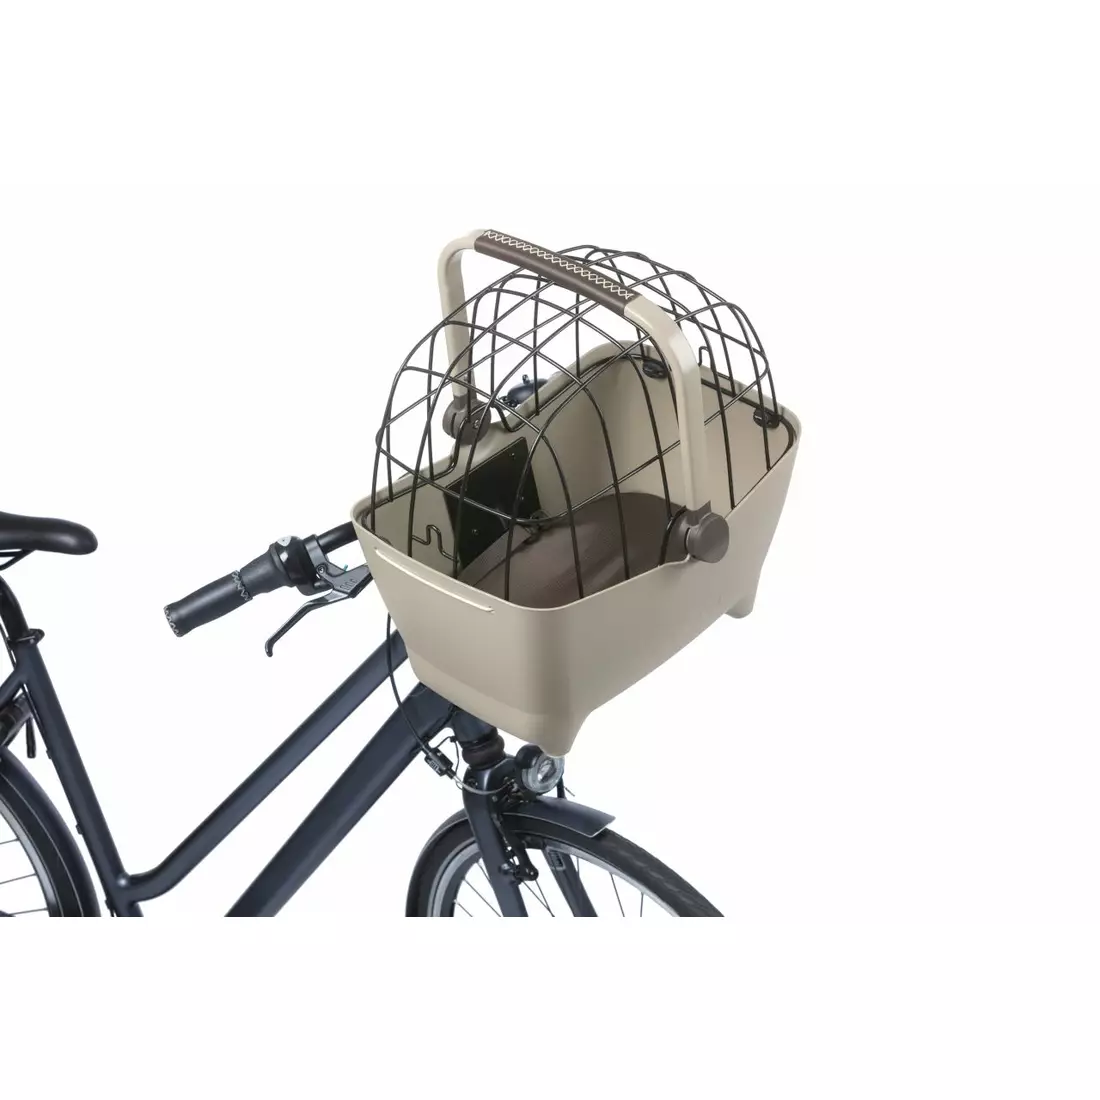 BASIL BUDDY KF bicycle front basket for a dog with a pillow, brown